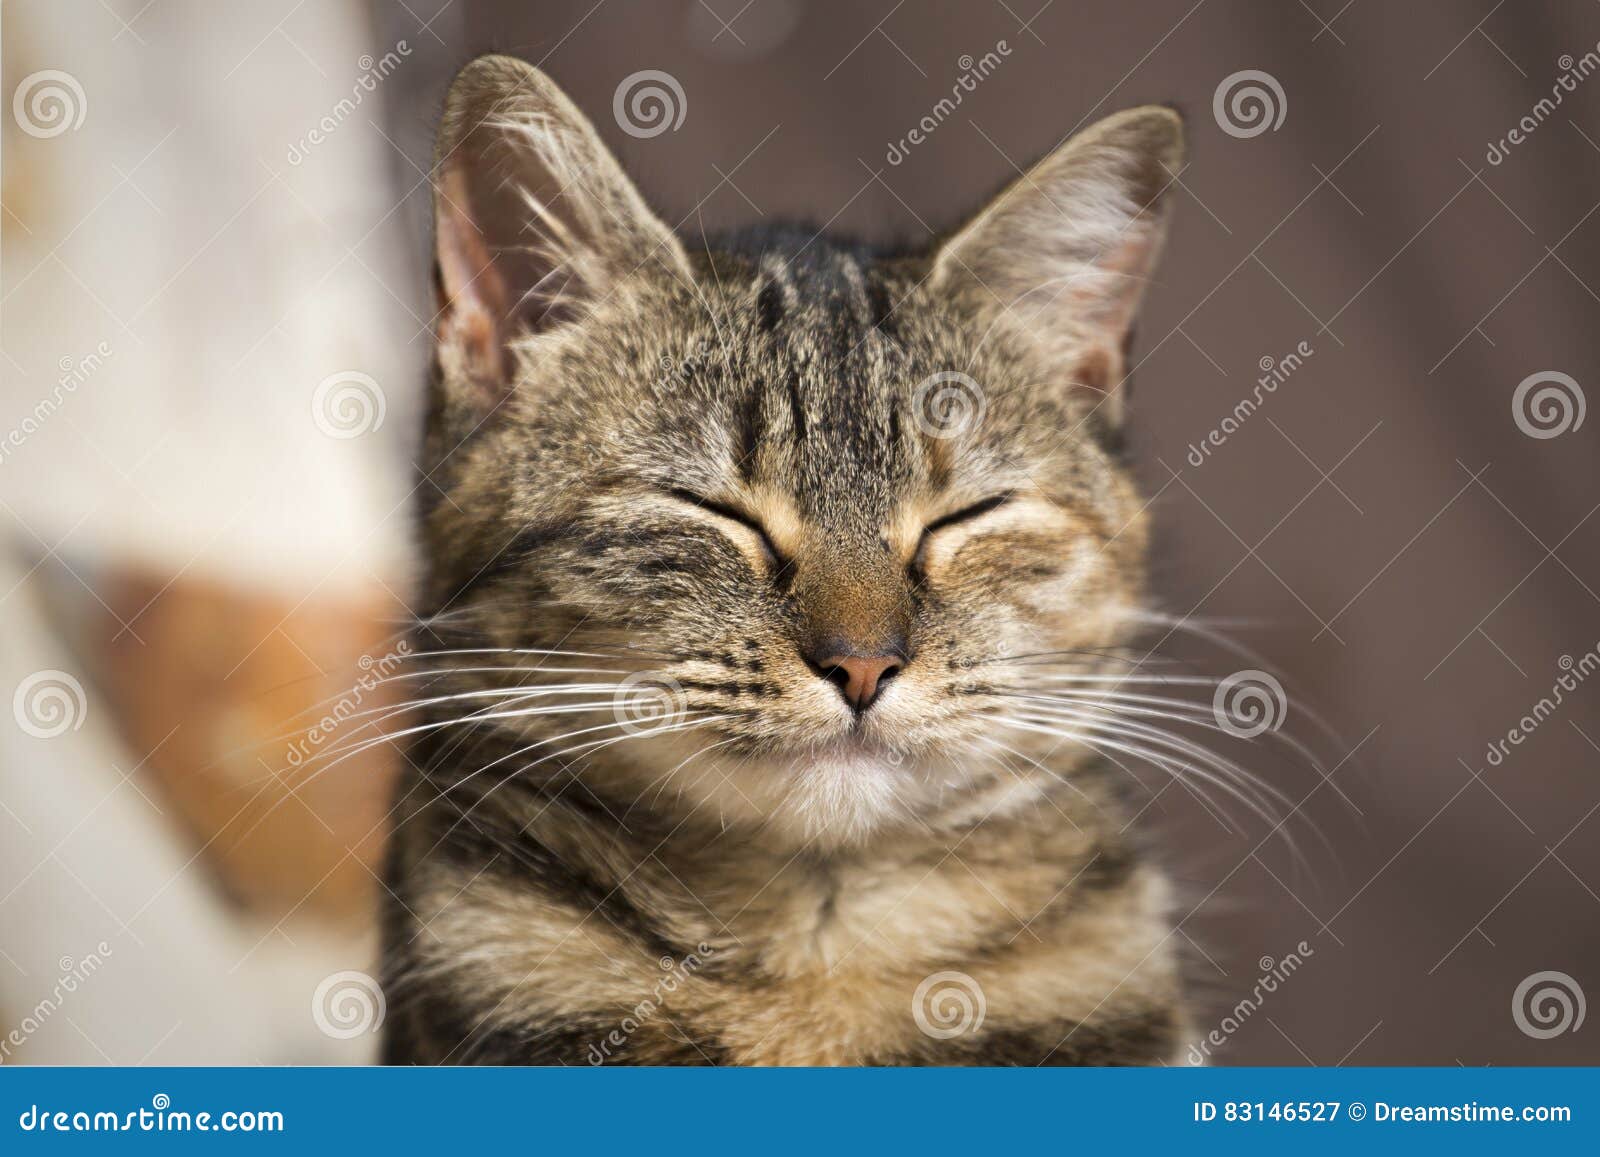 cat with eyes closed